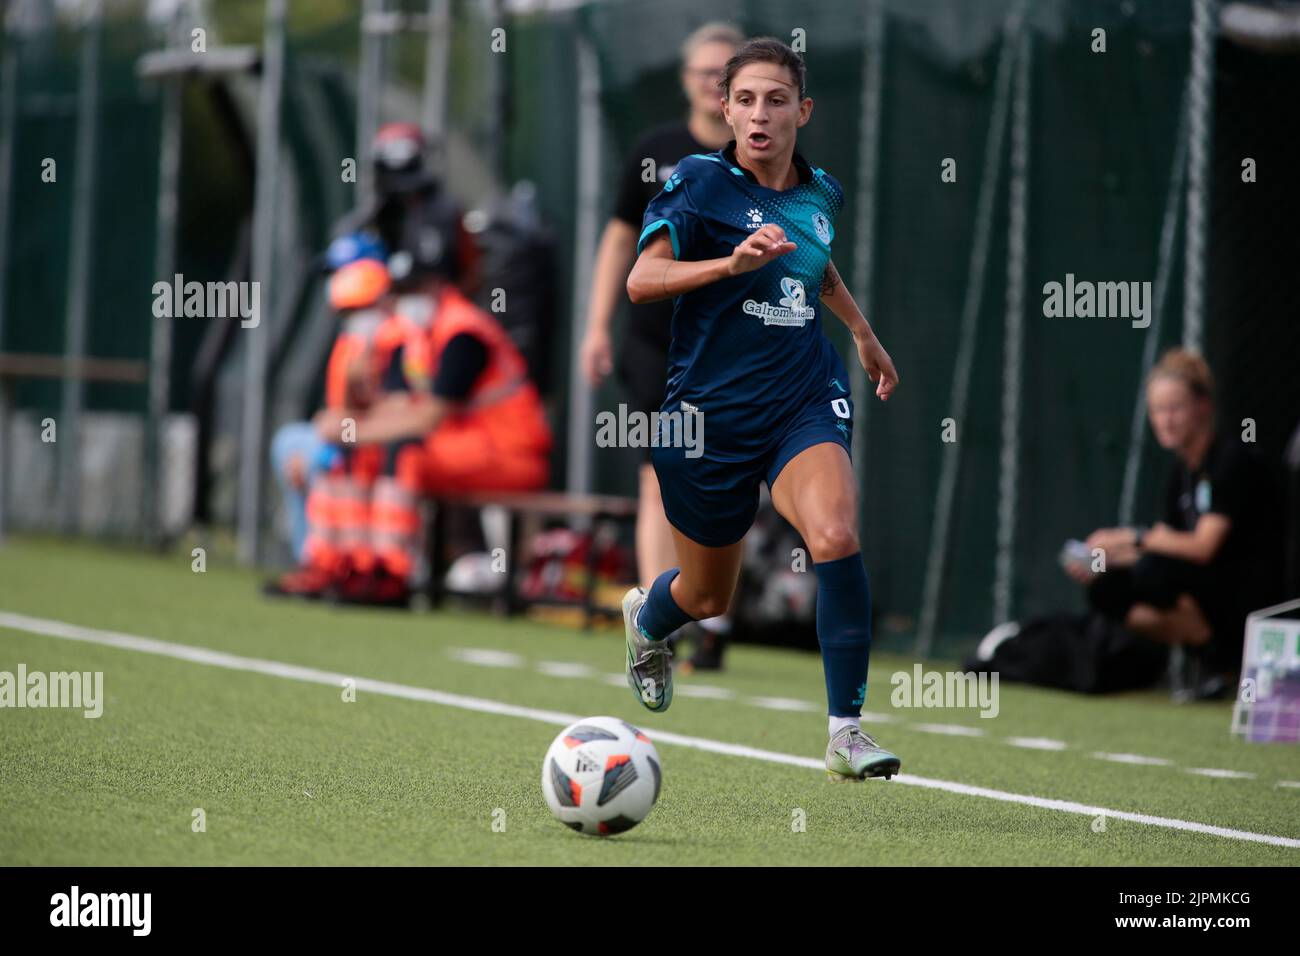 Shahar Nakav of fc qiryat during the match Tallin Fc Flora and Fc qiryat of the first qualifying round of the Uefa Women’s Champions League on August 18, 2022 at Juventus Training Ground, Turin, Italy. Photo Nderim Kaceli Stock Photo